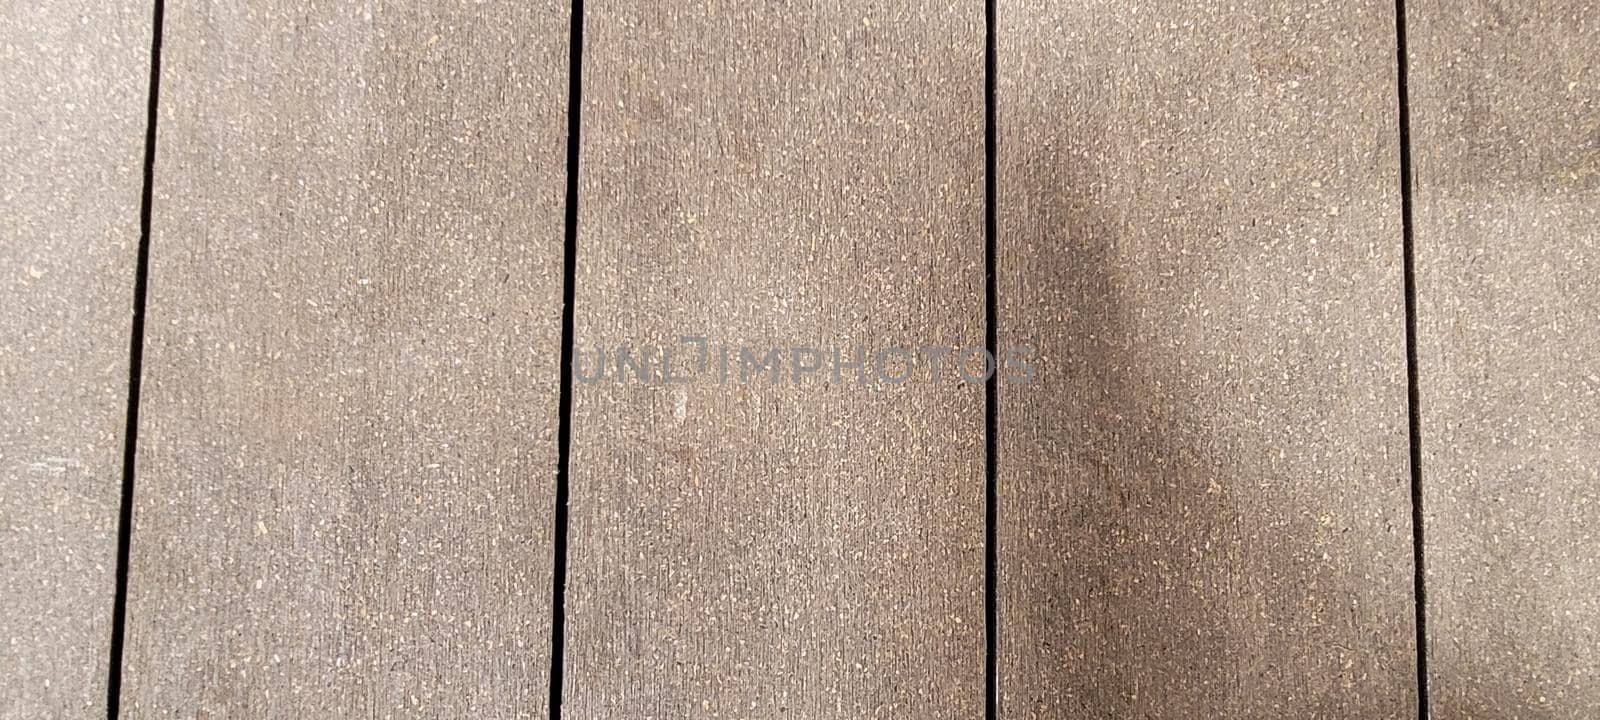 light rustic wood that can be used as a background by sarsa